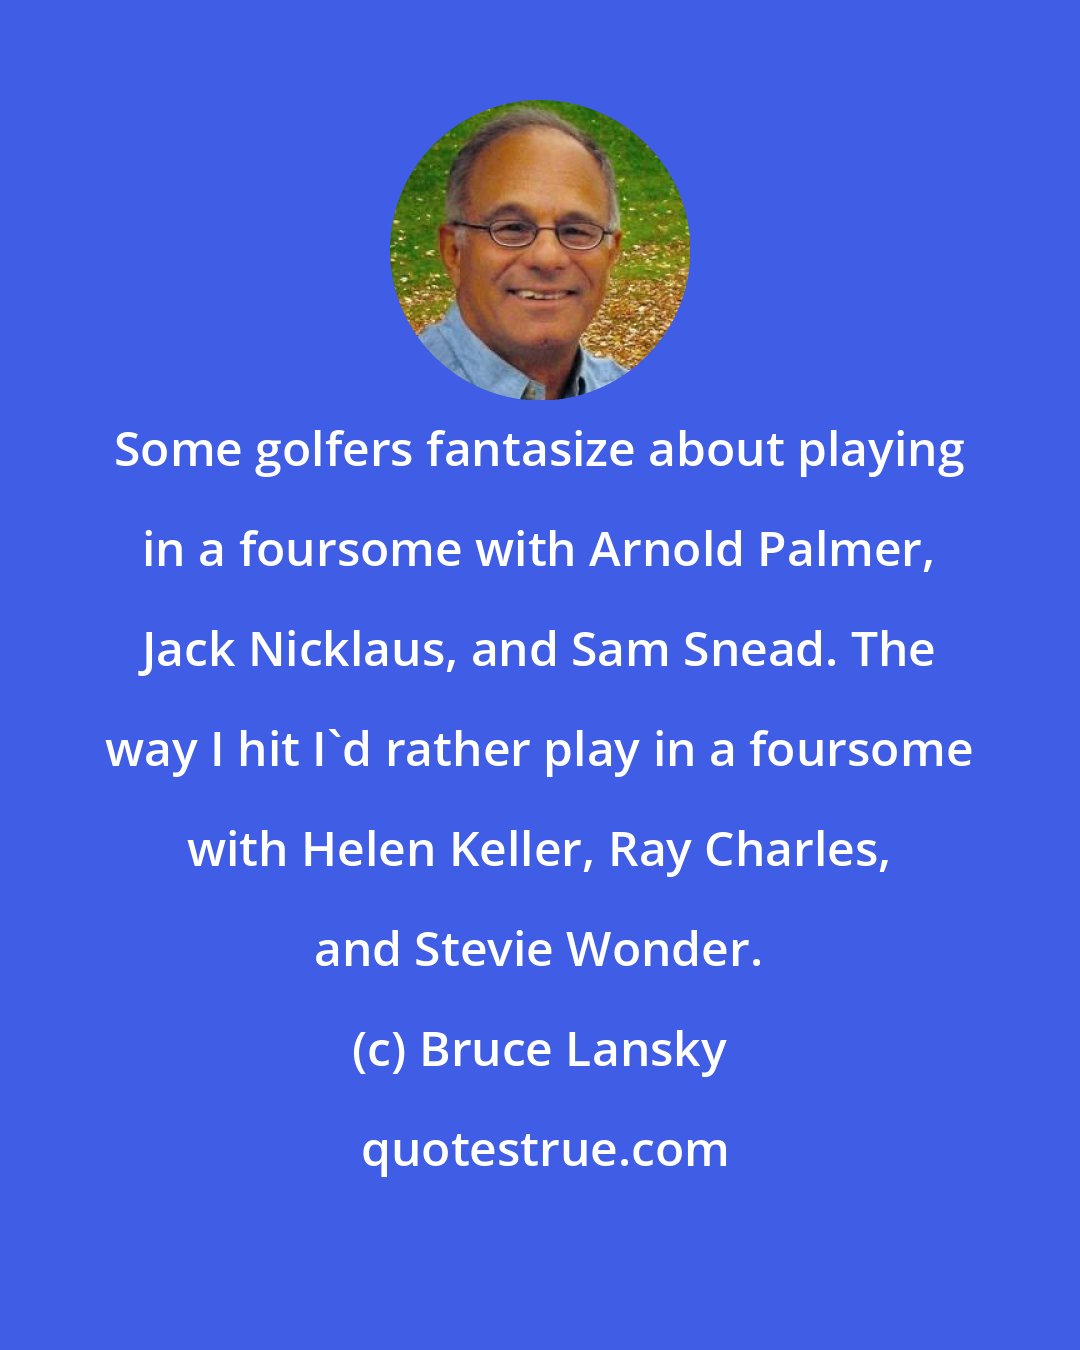 Bruce Lansky: Some golfers fantasize about playing in a foursome with Arnold Palmer, Jack Nicklaus, and Sam Snead. The way I hit I'd rather play in a foursome with Helen Keller, Ray Charles, and Stevie Wonder.